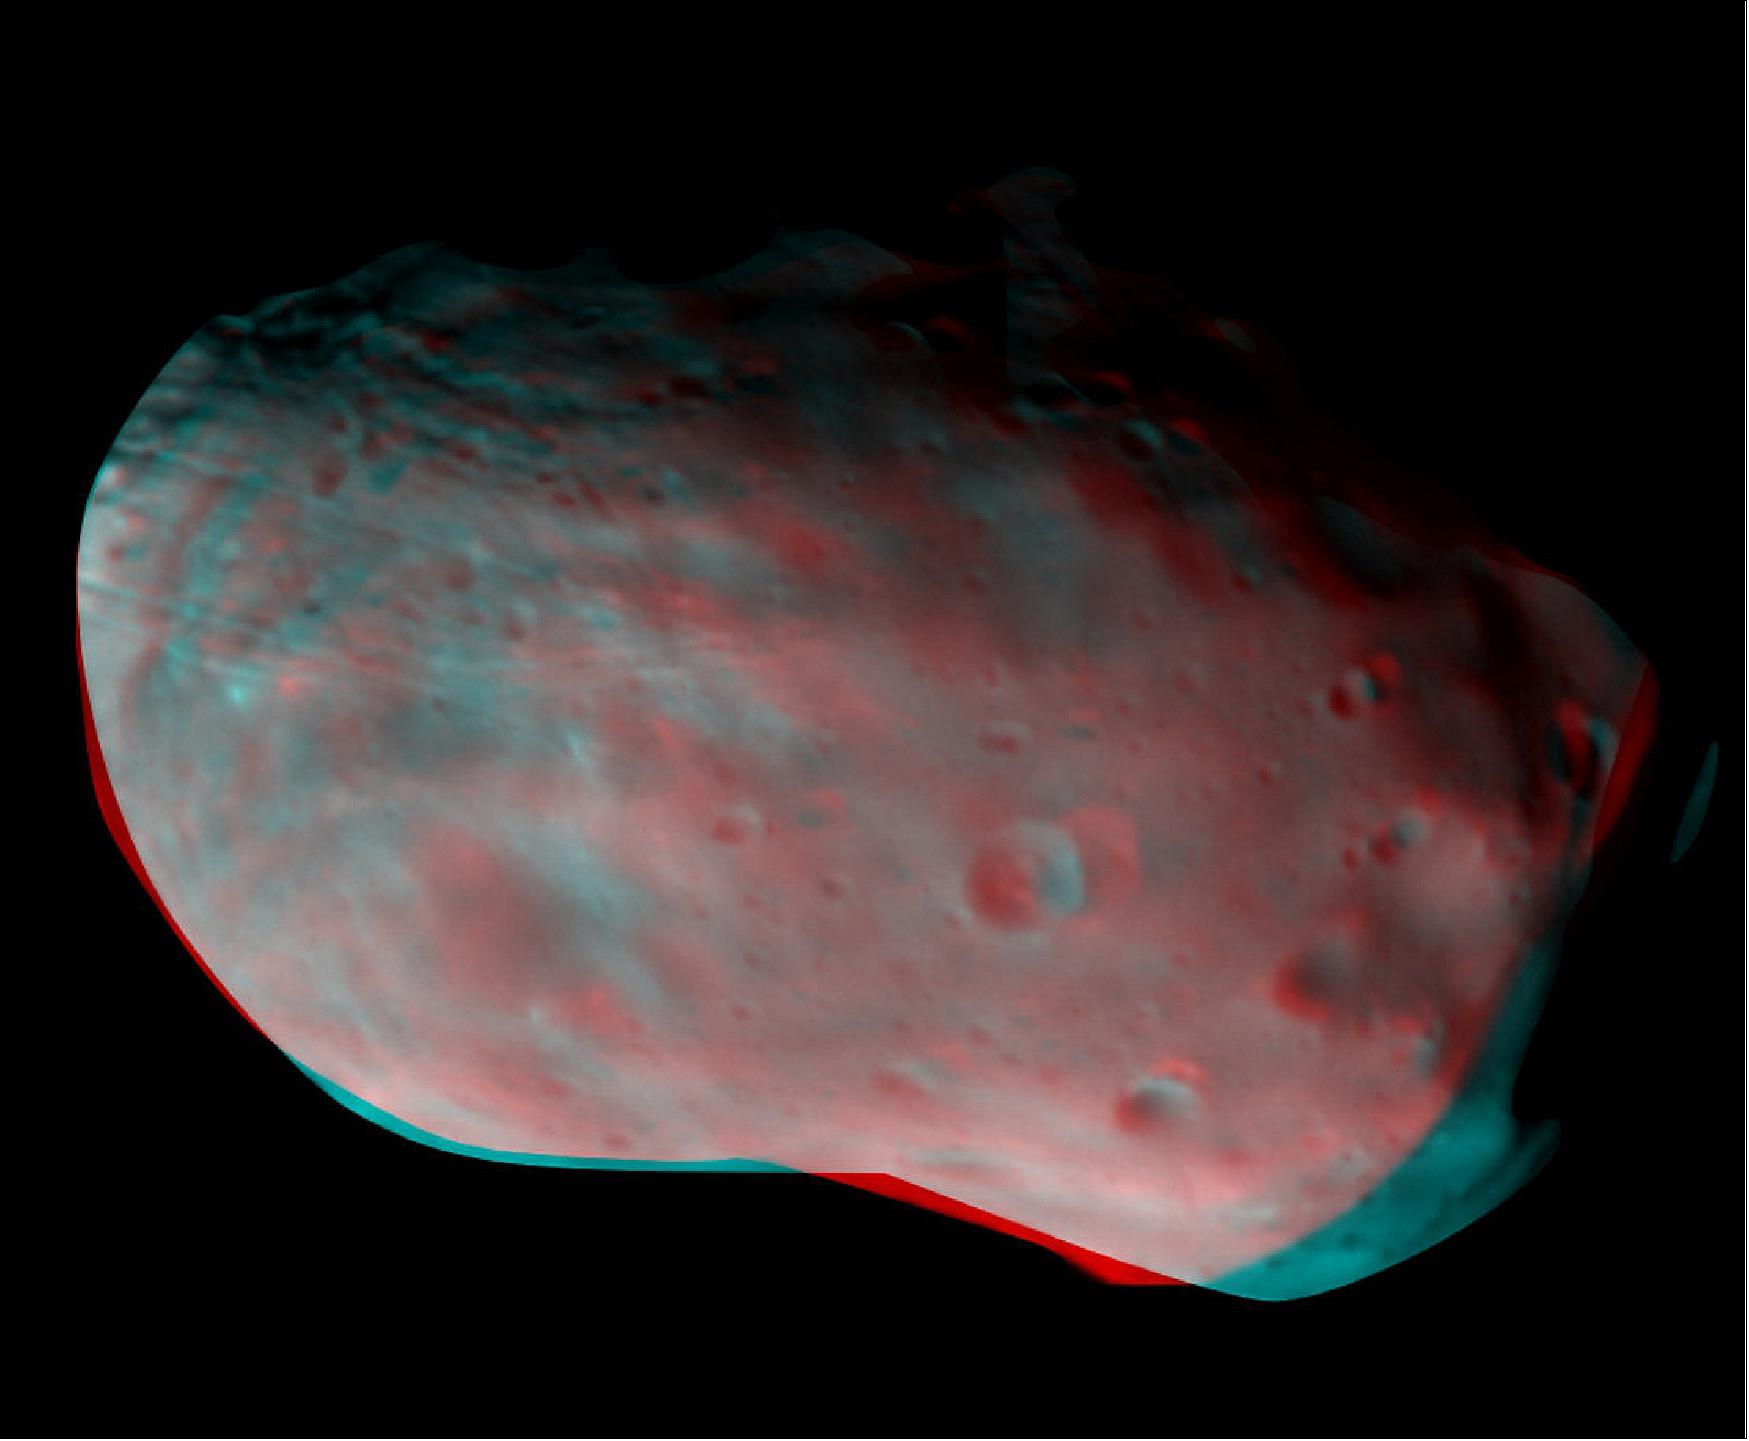 Figure 115: Phobos in 3D: The camera imaged the moon on 26 November from a distance of 7700 km, during the closest part of the spacecraft’s orbit around Mars. TGO’s elliptical orbit currently takes it to within 230–310 km of the surface at its closest point and around 98 000 km at its furthest every 4.2 days. A color composite has been created from several individual images taken through several filters. The camera’s filters are optimized to reveal differences in mineralogical composition, seen as ‘bluer’ or ‘redder’ colors in the processed image. (image credit: ESA)